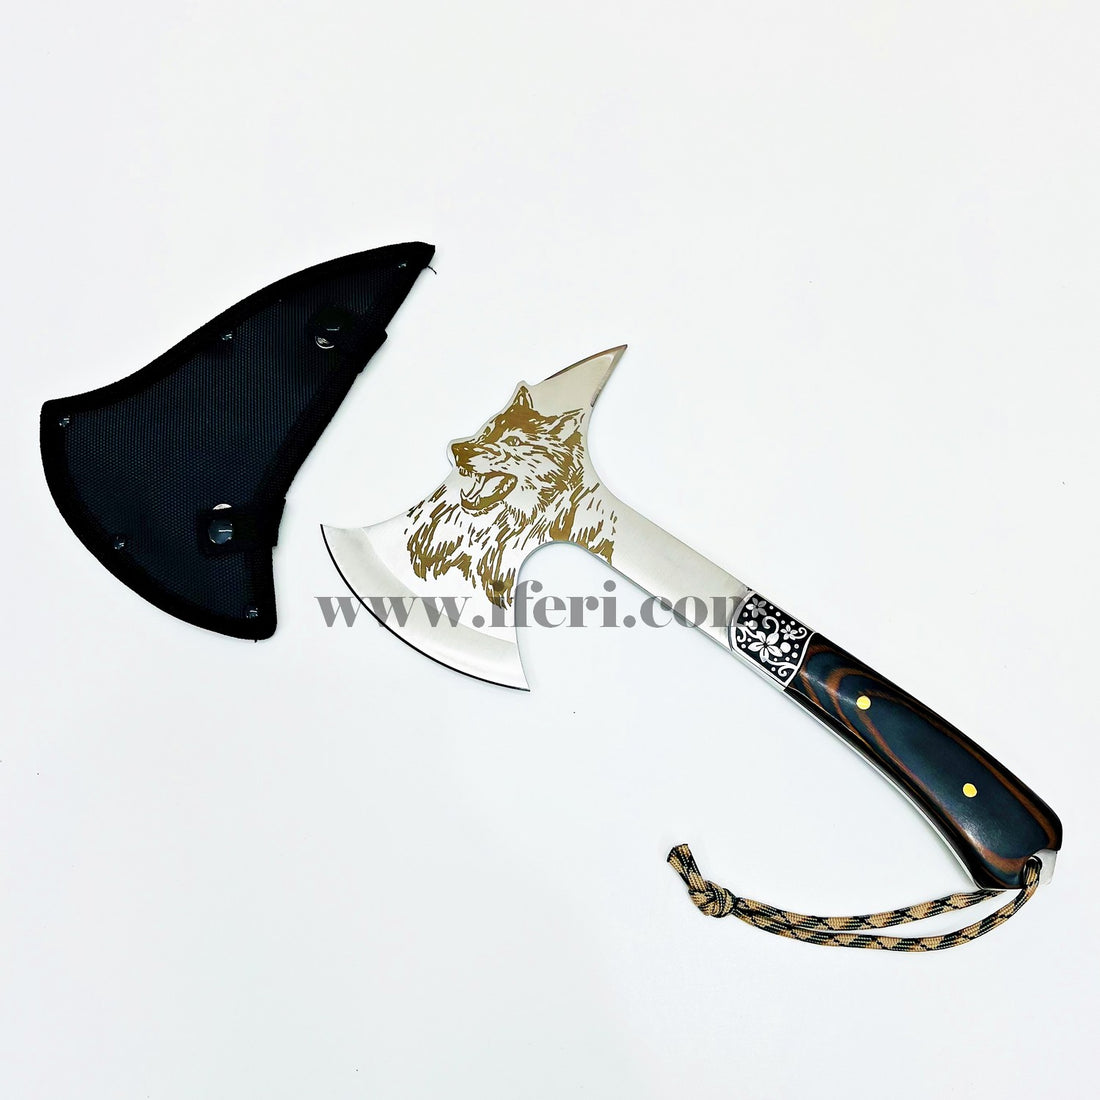 12 inch Multifunctional Survival Tool Camping Axe RY-251